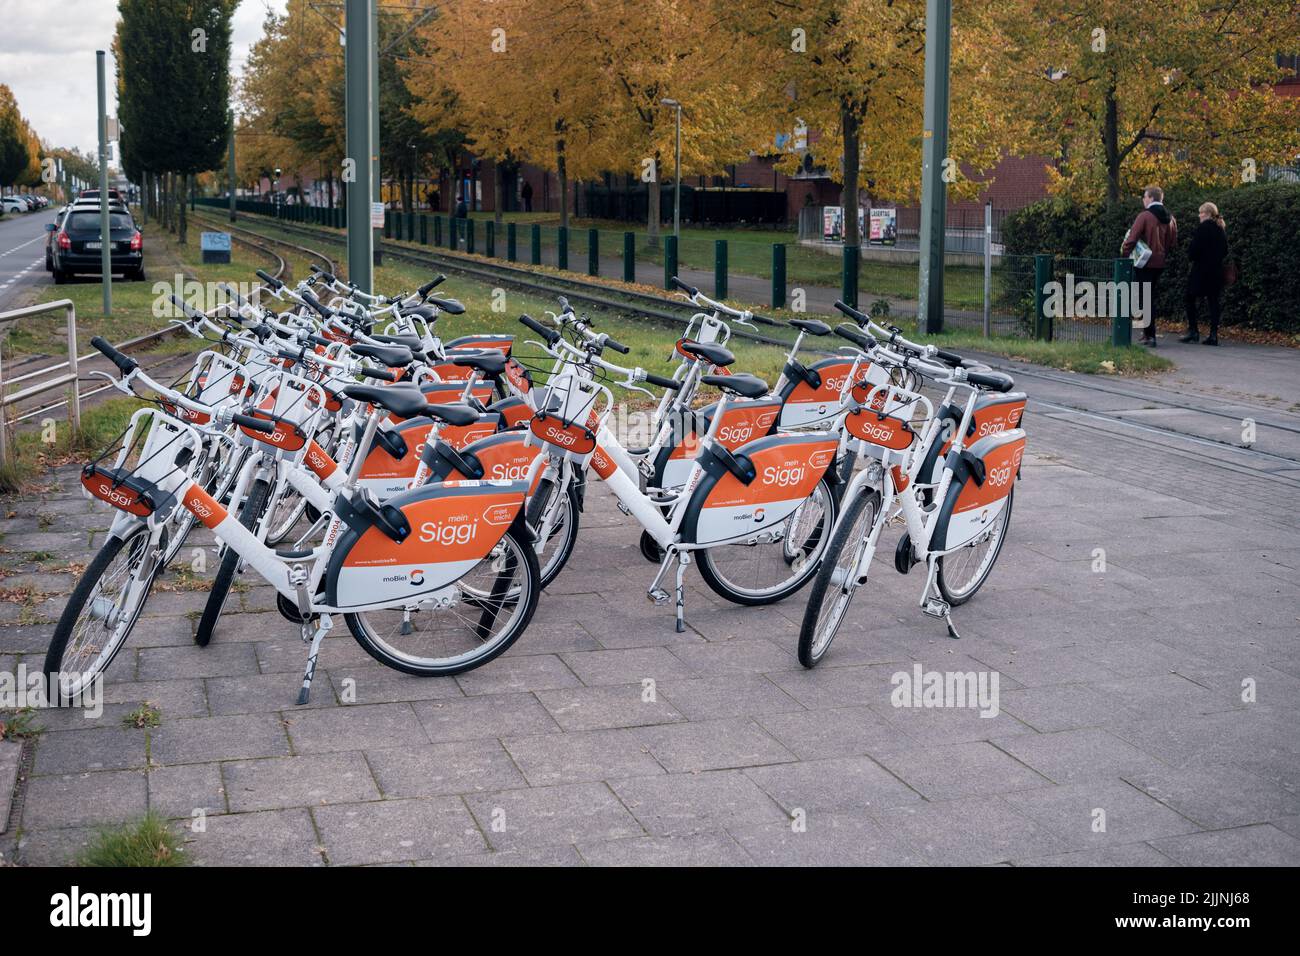 A scenic shot of a bicycle fleet at Zehlendorfer Damm in Bielefeld, Germany Stock Photo